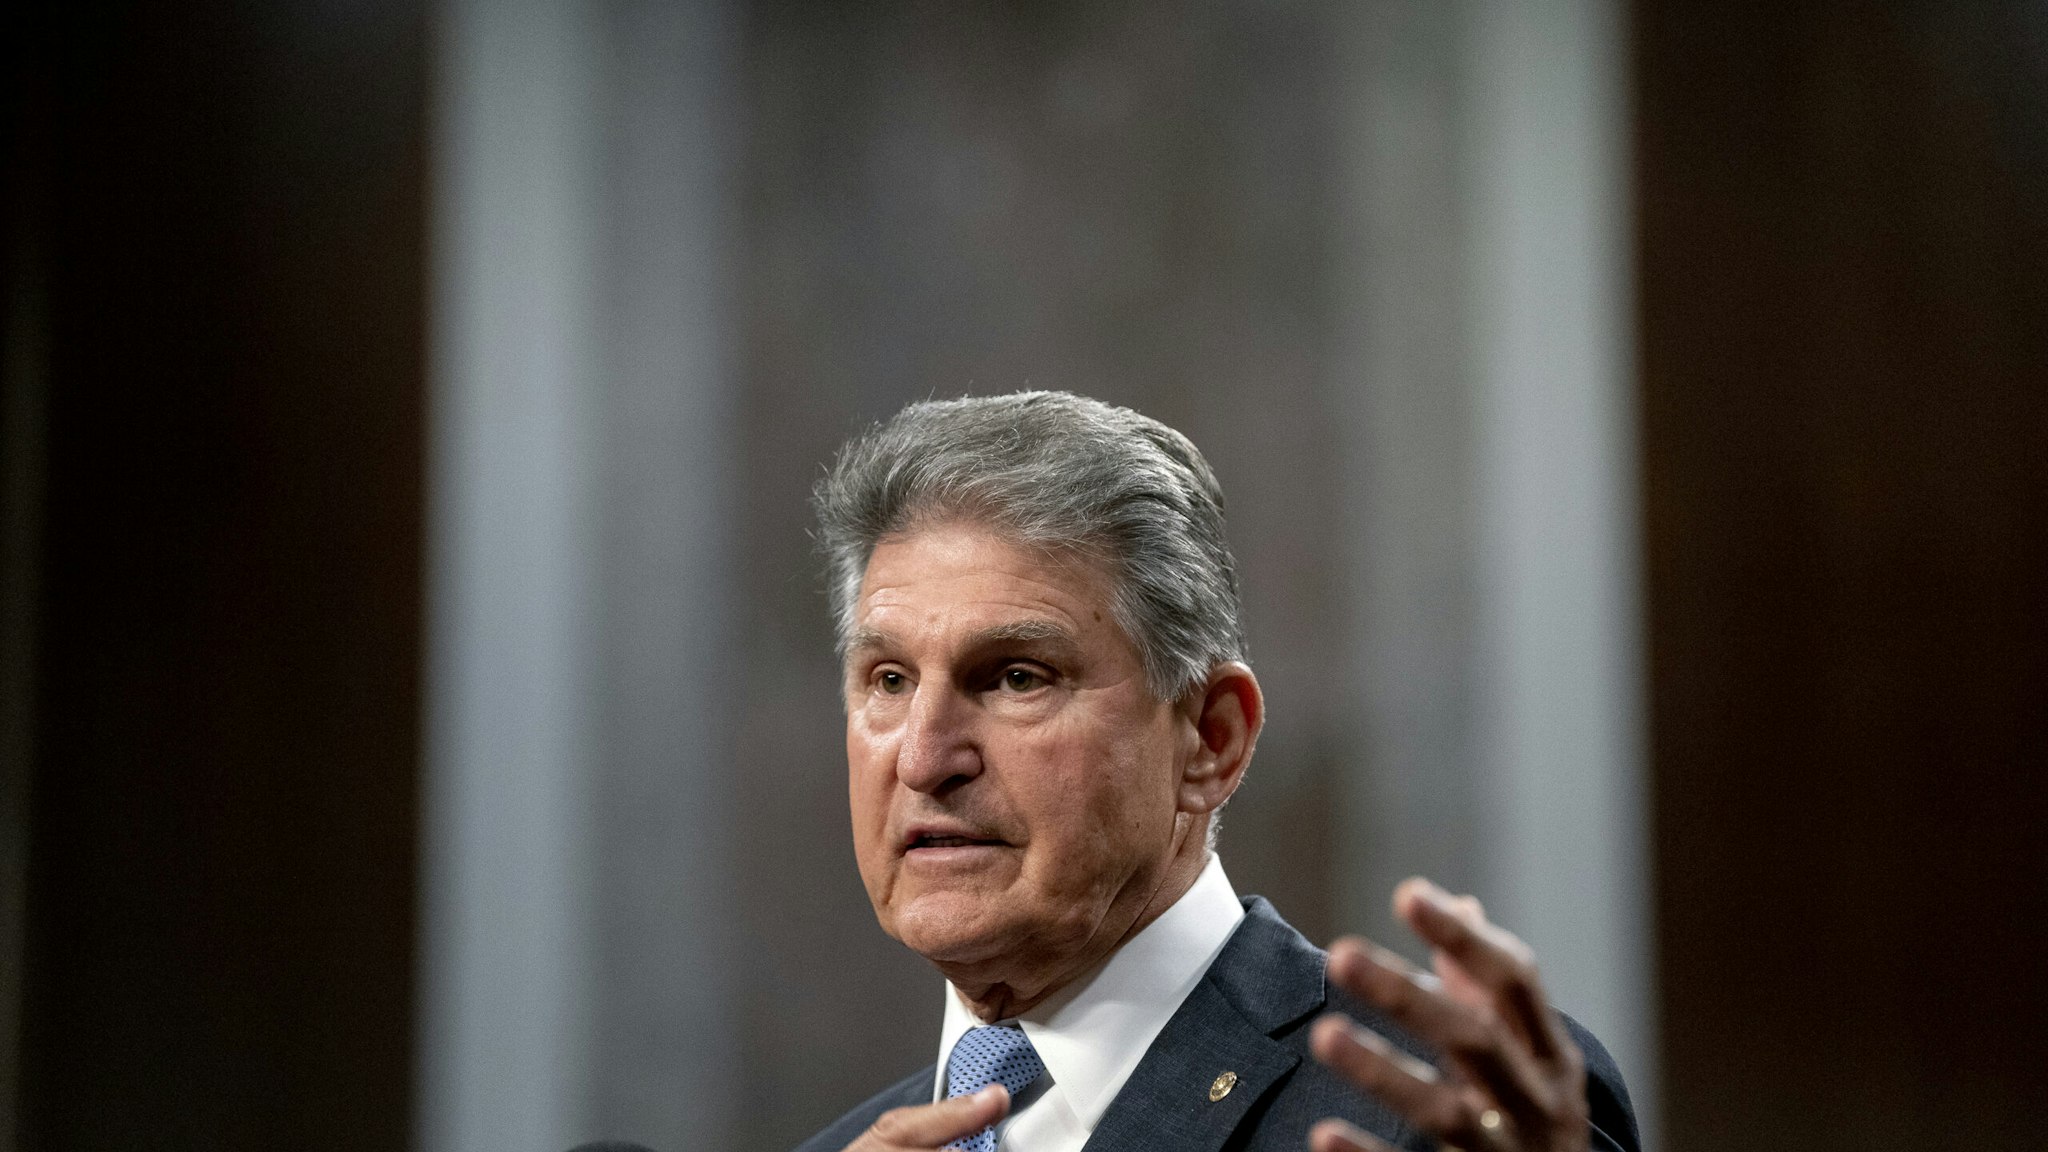 Senator Joe Manchin, a Democrat from West Virginia, speaks during a news conference in the Dirksen Senate Office Building in Washington, D.C., U.S., on Wednesday, July 28, 2021. A bipartisan group of senators and the White House reached a tentative agreement on a $550 billion infrastructure package, a significant breakthrough in the drive to muscle through Congress a massive infusion of spending for roads, bridges and other critical projects.